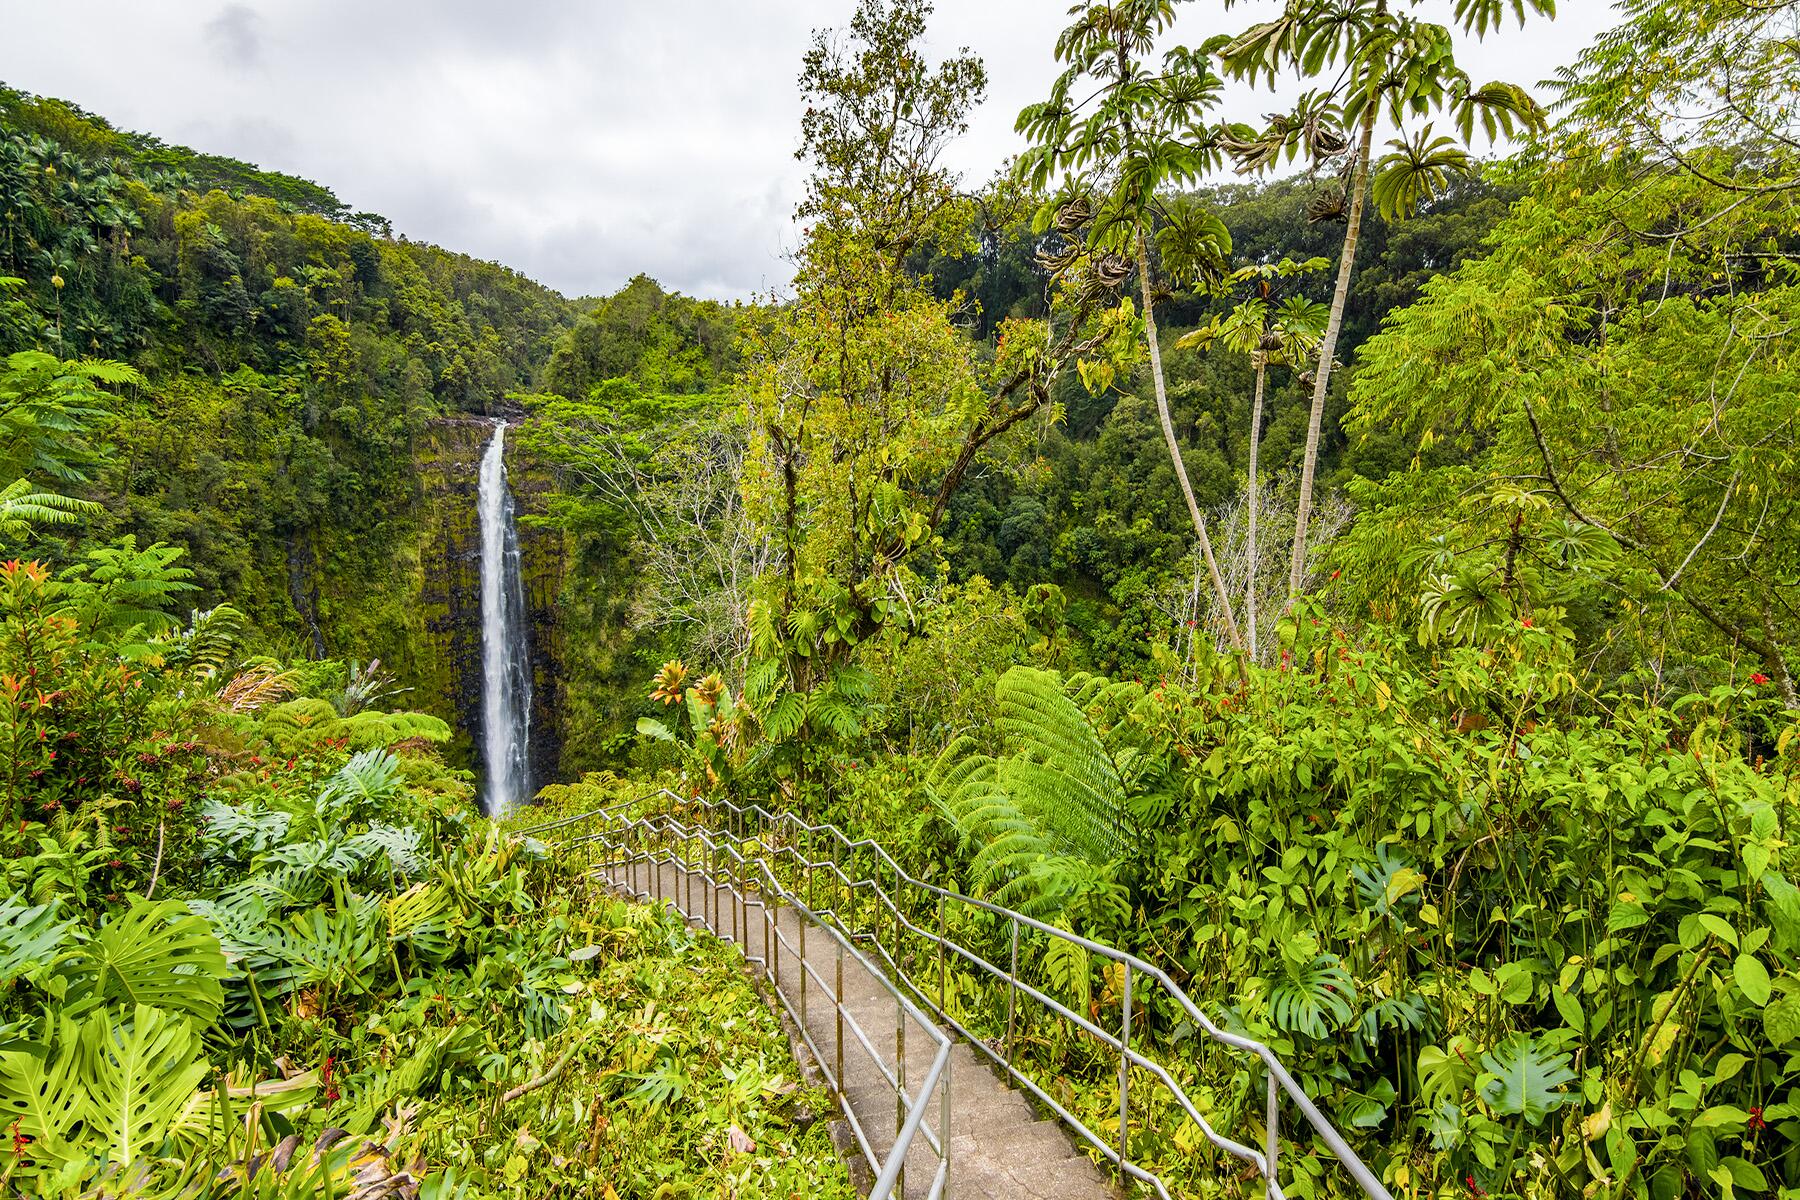 <a href='https://www.fodors.com/world/north-america/usa/hawaii/experiences/news/photos/dont-do-these-things-in-hawaii#'>From &quot;The Absolute Dumbest Things Tourists Have Done in Hawaii: Jumping Over the Railing at Akaka Falls&quot;</a>